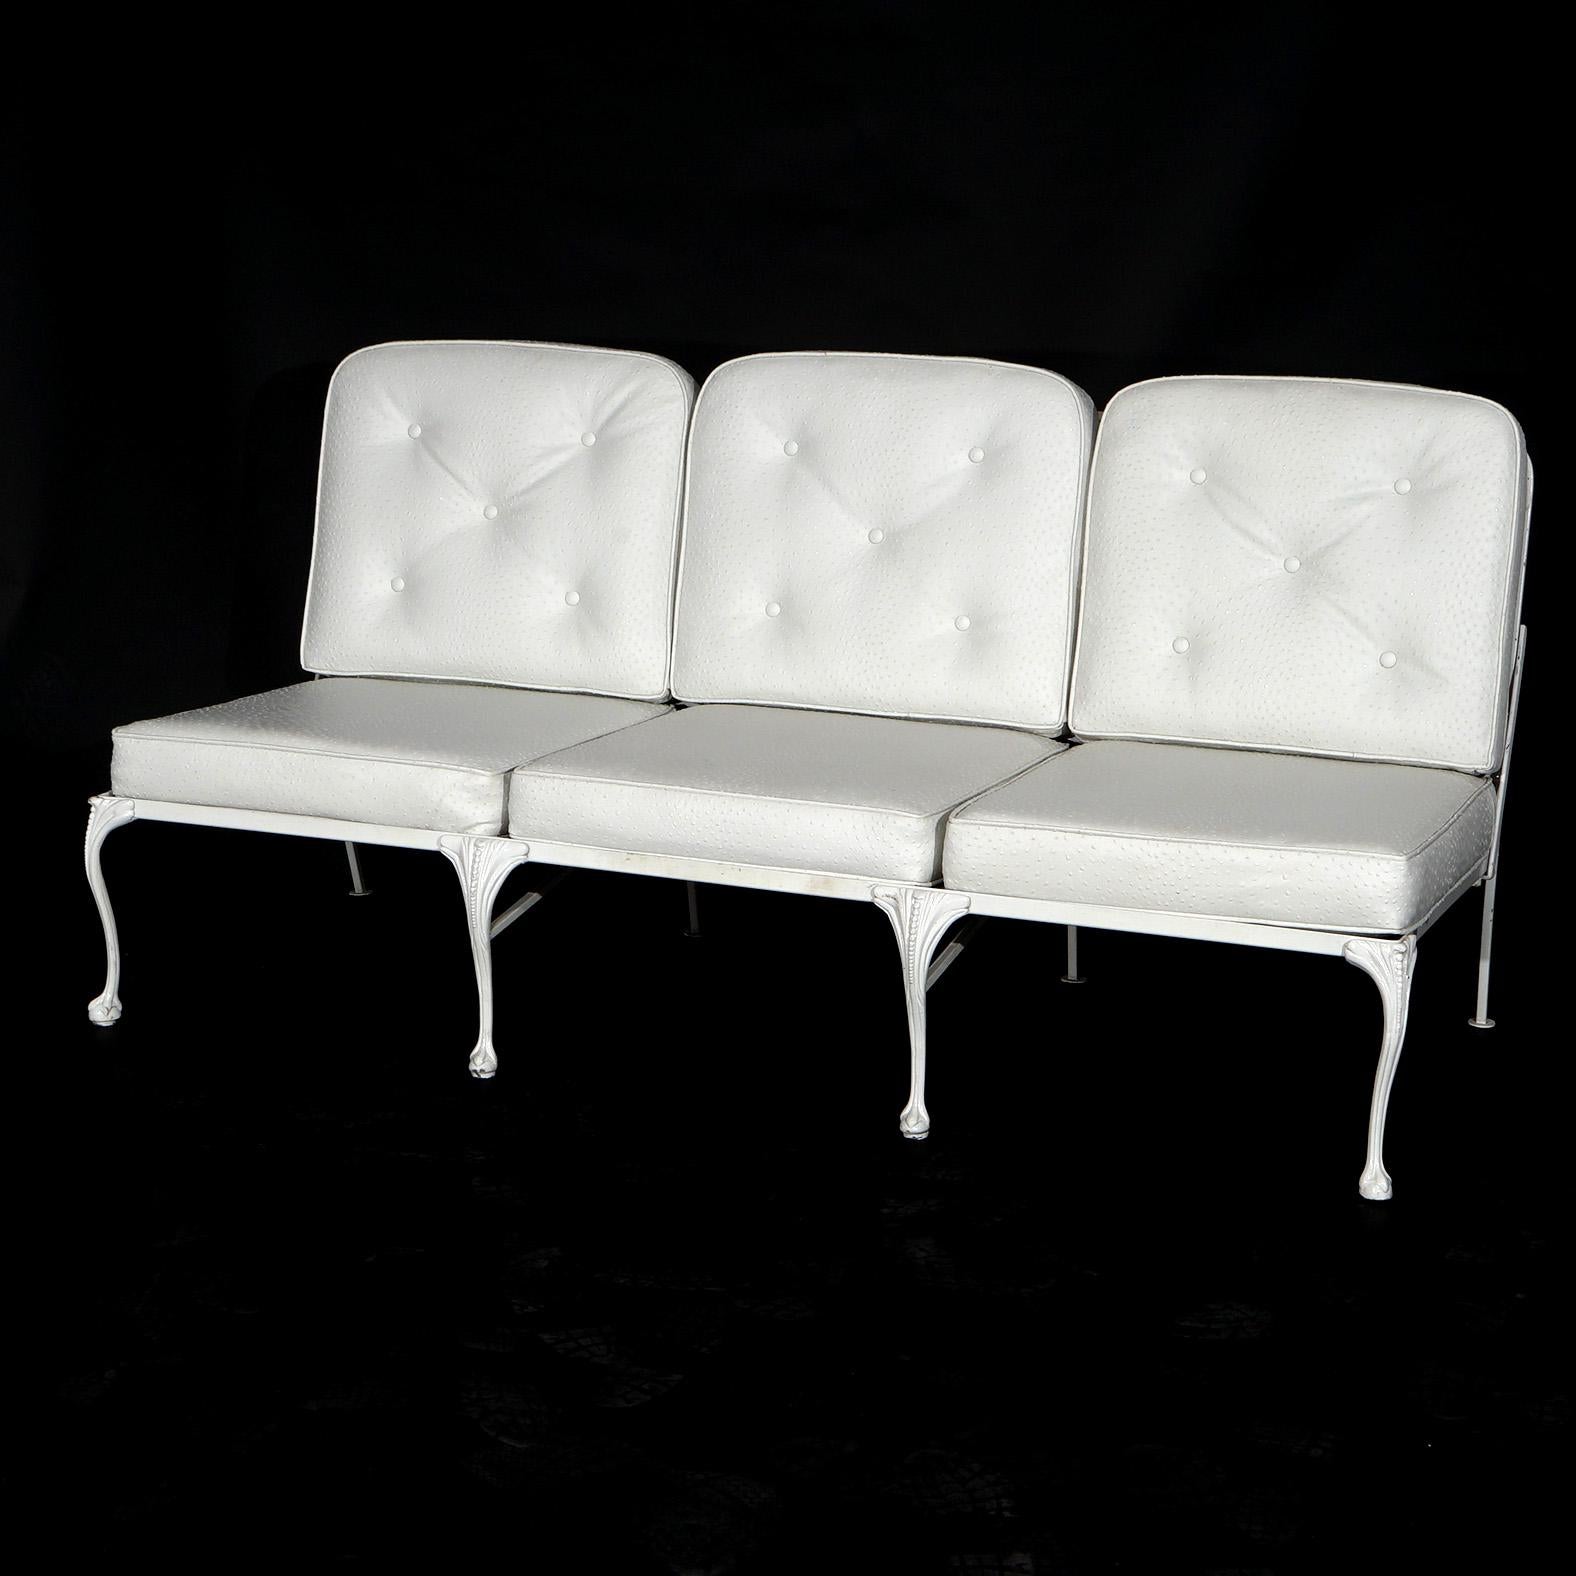 20th Century Painted & Scrolled Wrought Iron Sofa, Two Chairs & Two Ottomans 20th C For Sale